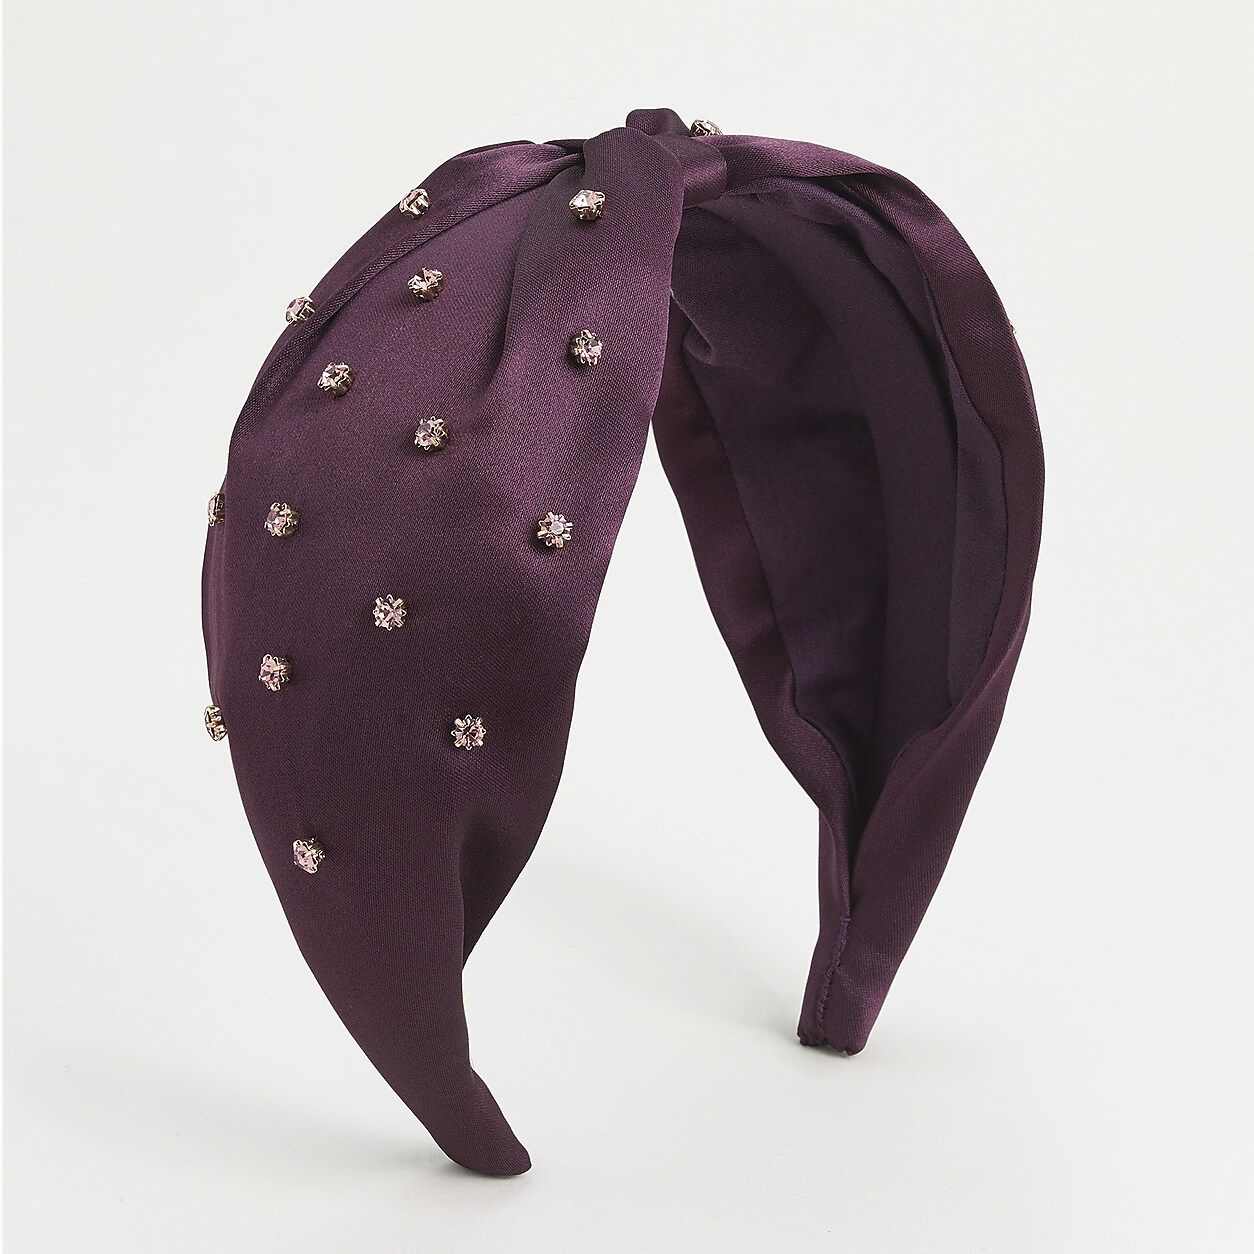 Wide-knot headband with crystals | J.Crew US